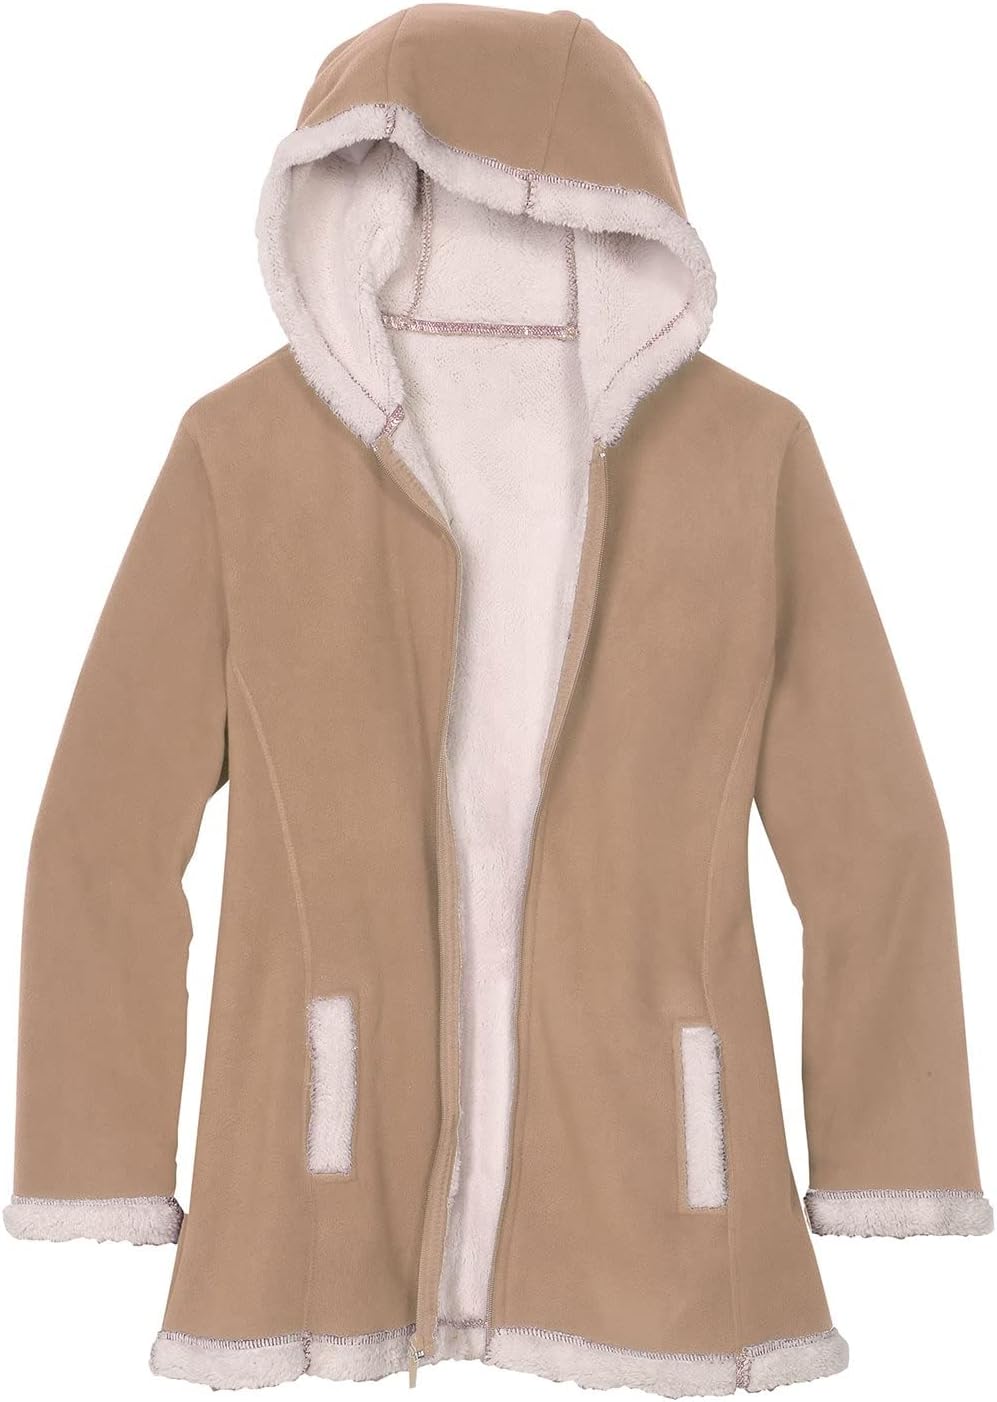   Essentials Women's Polar Fleece Lined Sherpa Full-Zip  Jacket, Blush, X-Small : Clothing, Shoes & Jewelry